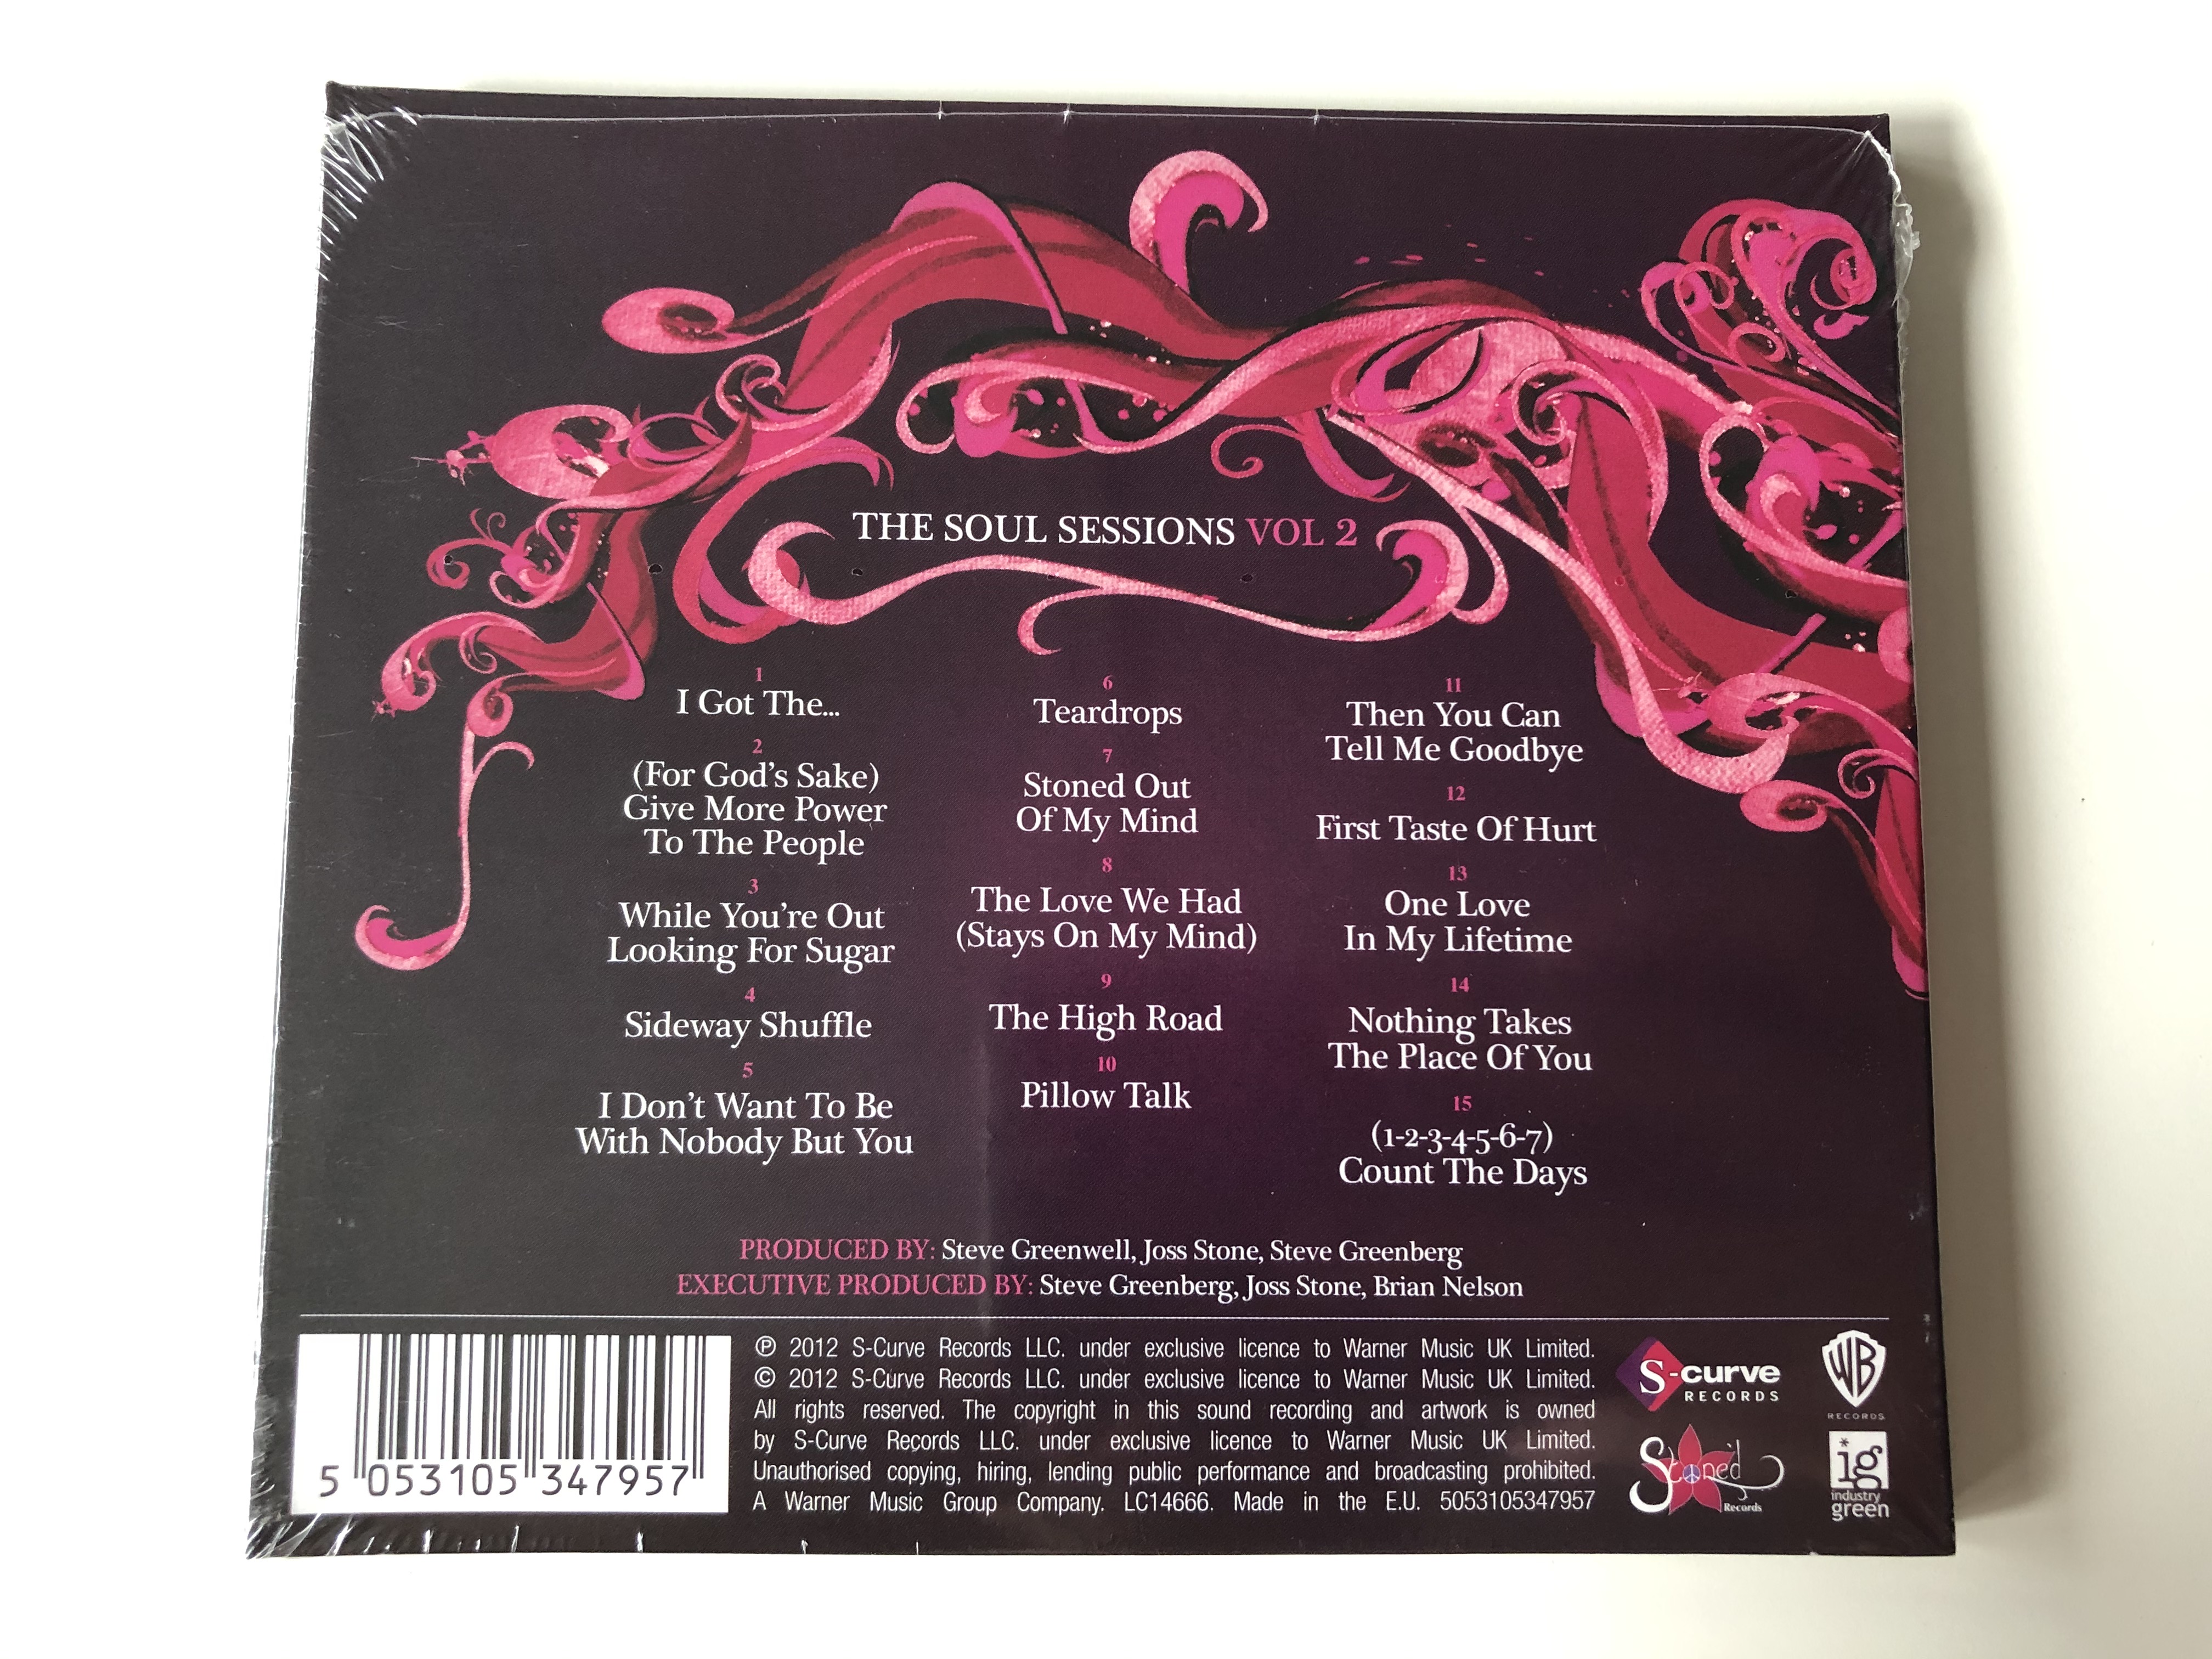 joss-stone-the-soul-sessions-vol-2-deluxe-edition-s-curve-records-audio-cd-2012-5053105347957-2-.jpg